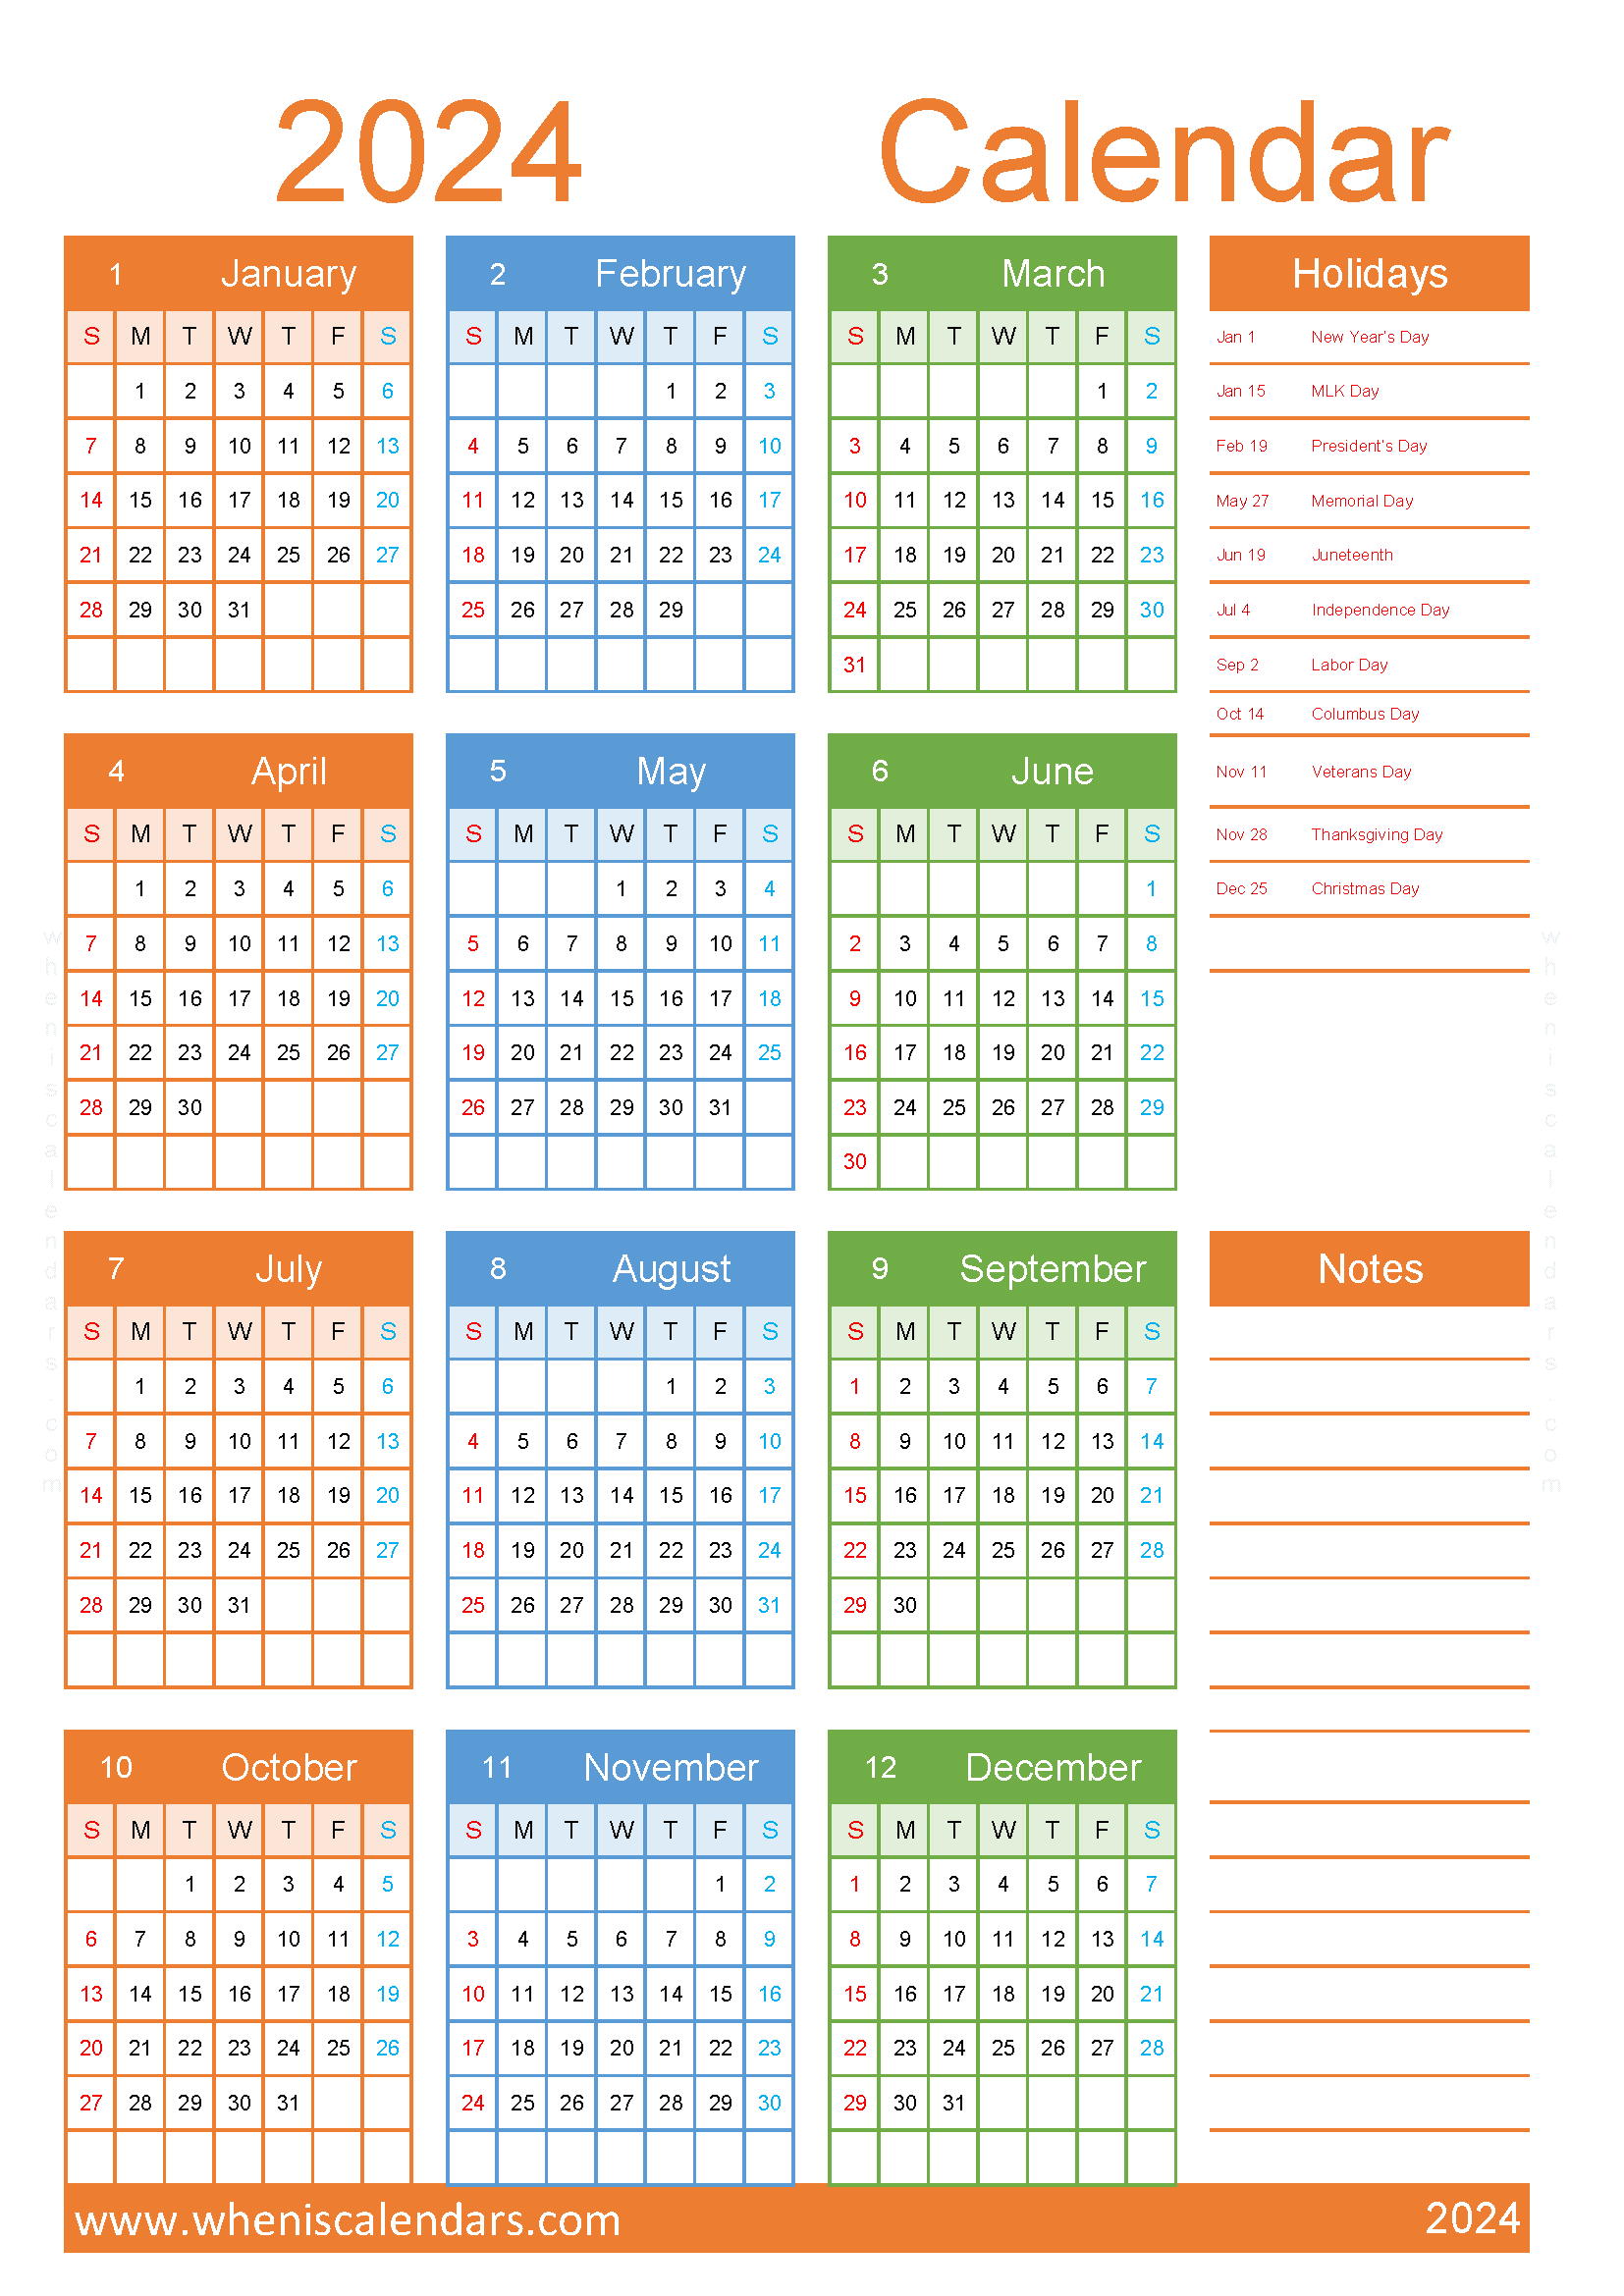 2024 Calendar with Holidays printable free A4 in vertical portrait